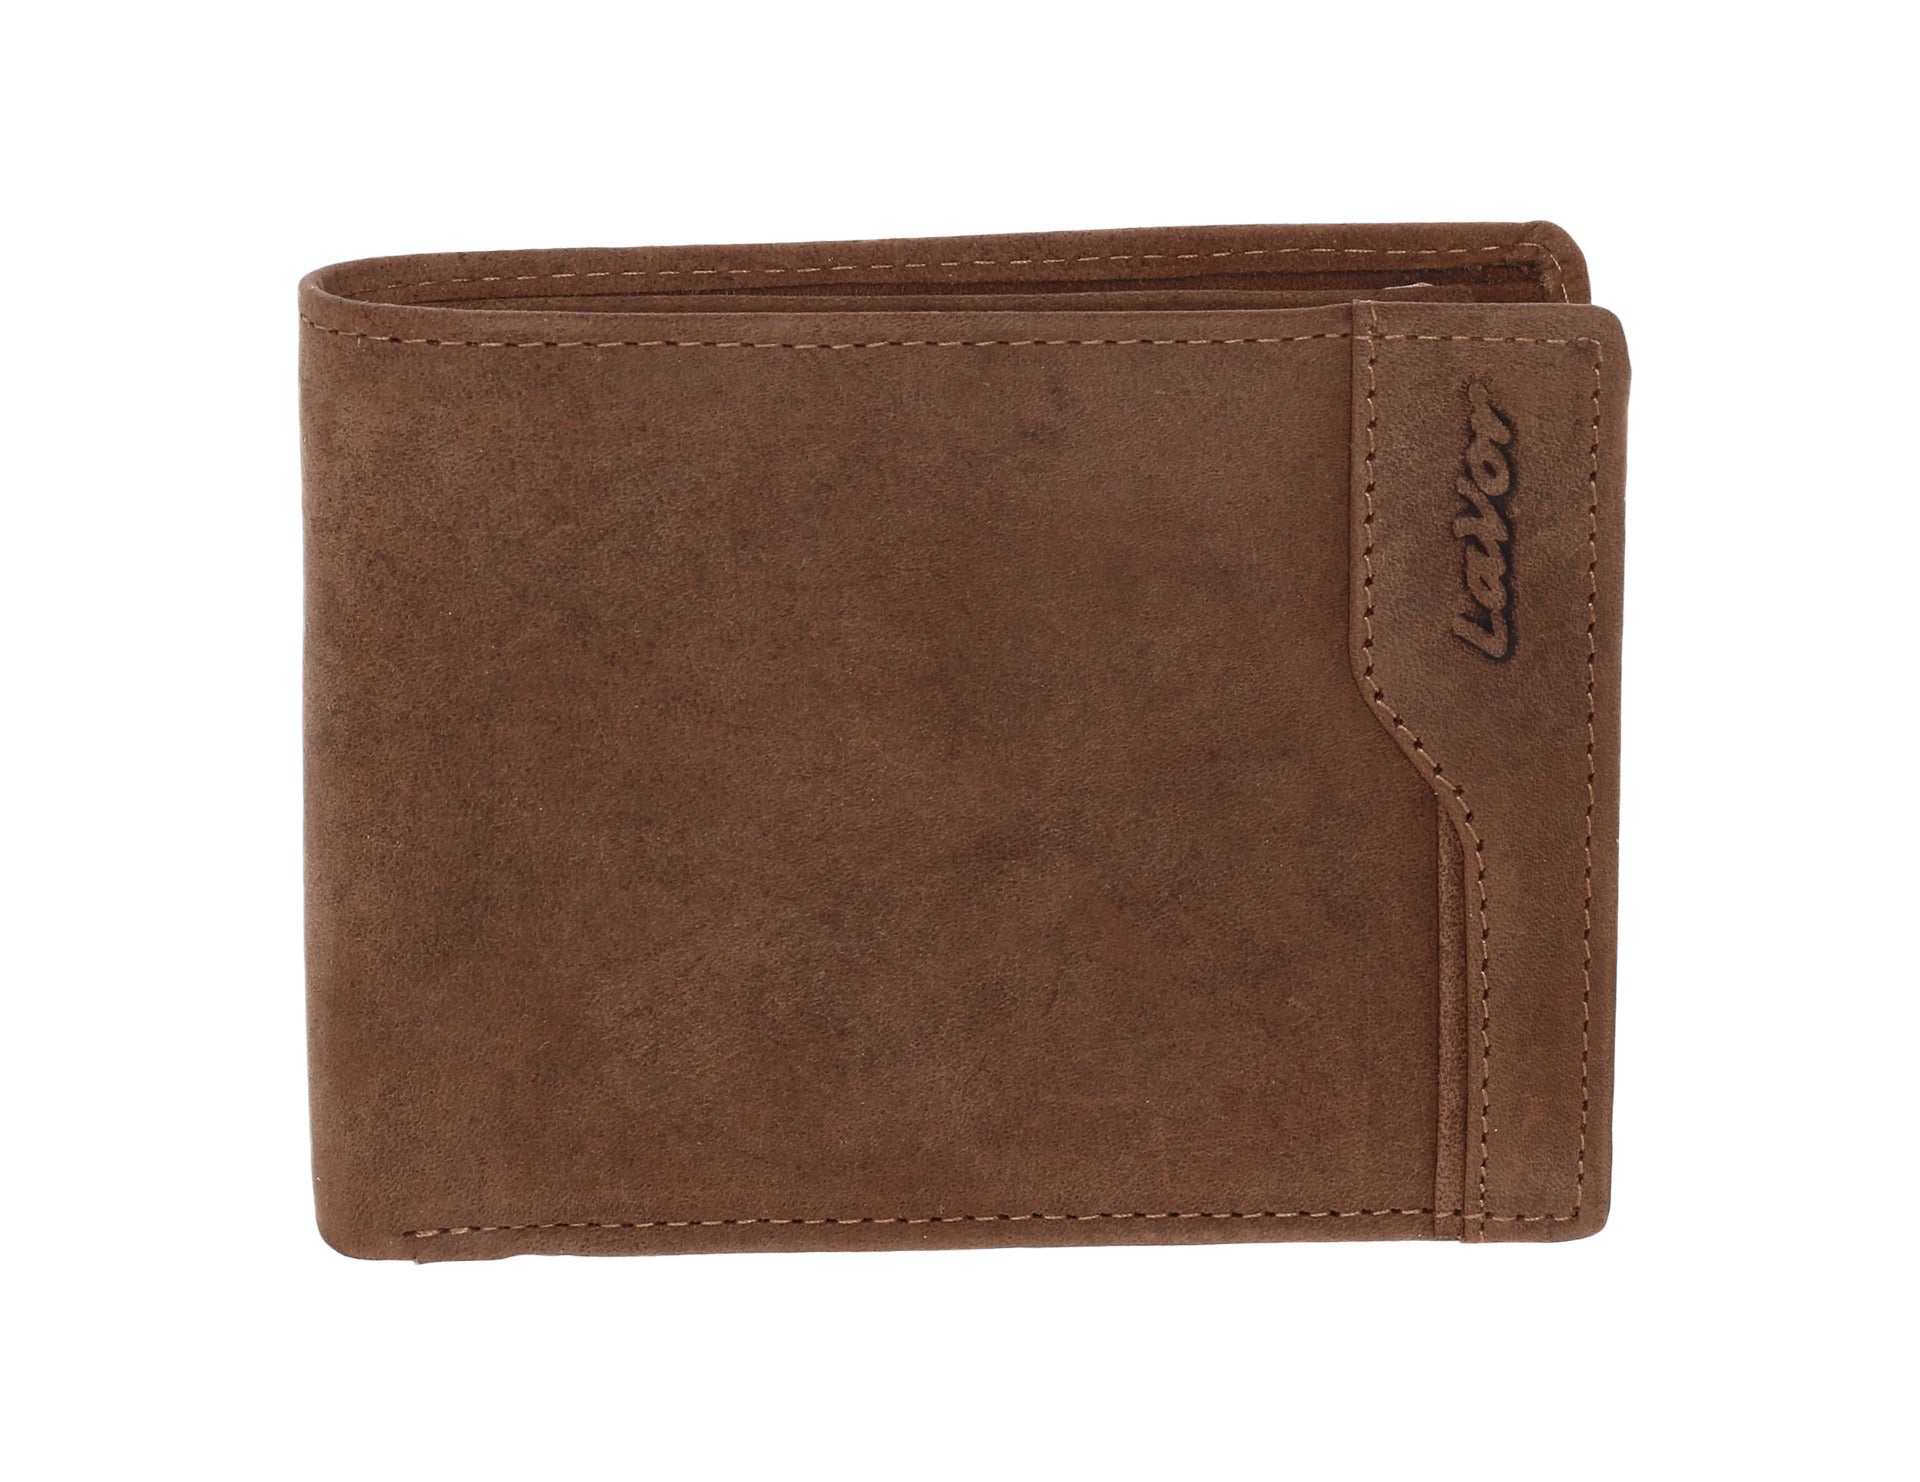 Suede, leather wallet in brown colour. 3709